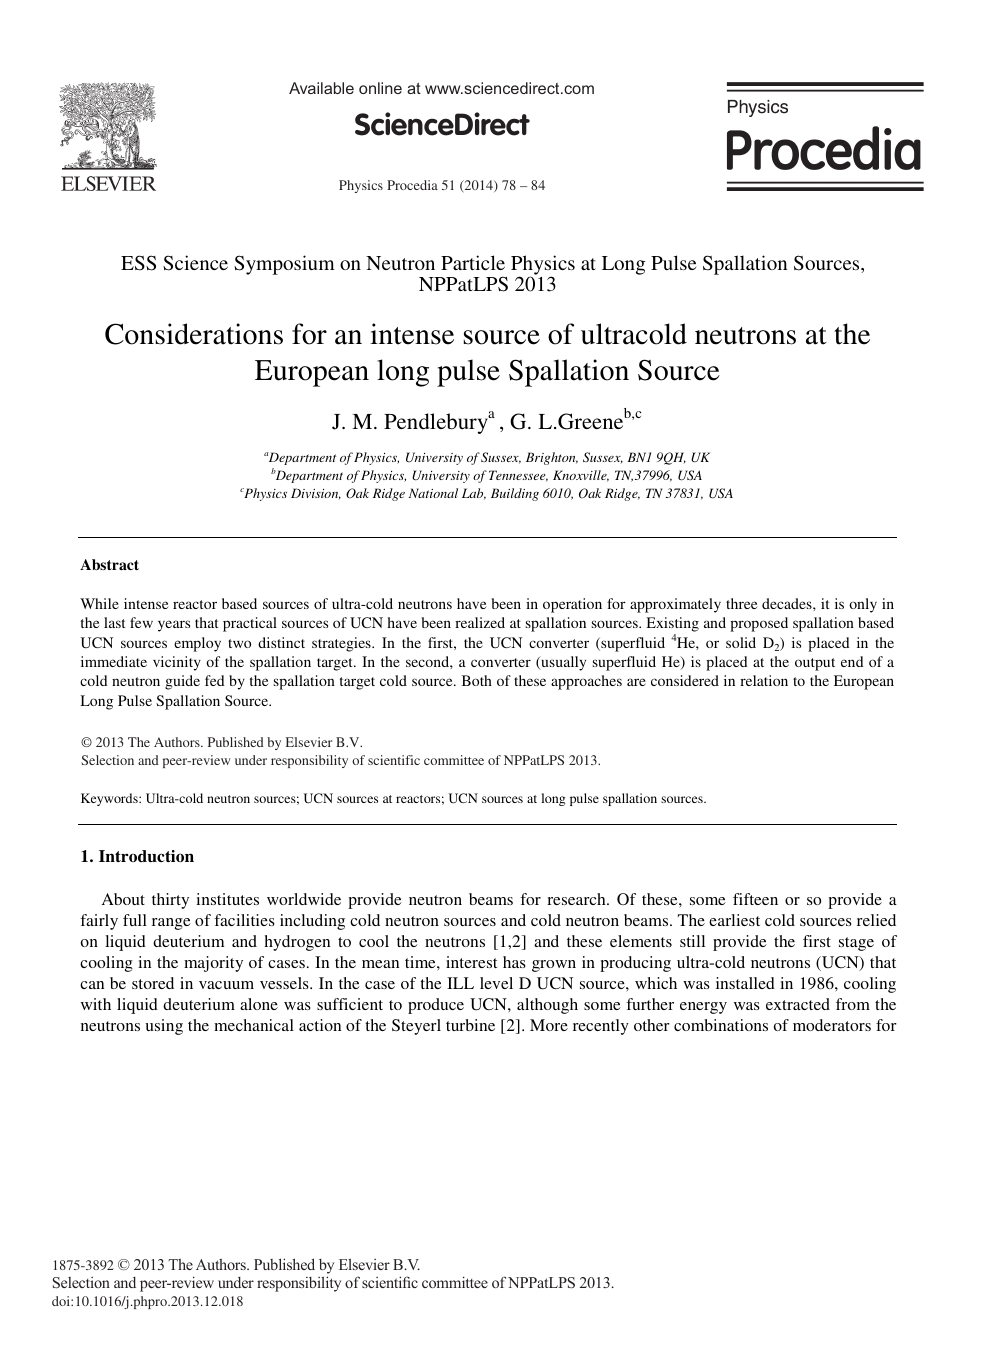 Considerations For An Intense Source Of Ultracold Neutrons At The European Long Pulse Spallation Source Topic Of Research Paper In Physical Sciences Download Scholarly Article Pdf And Read For Free On